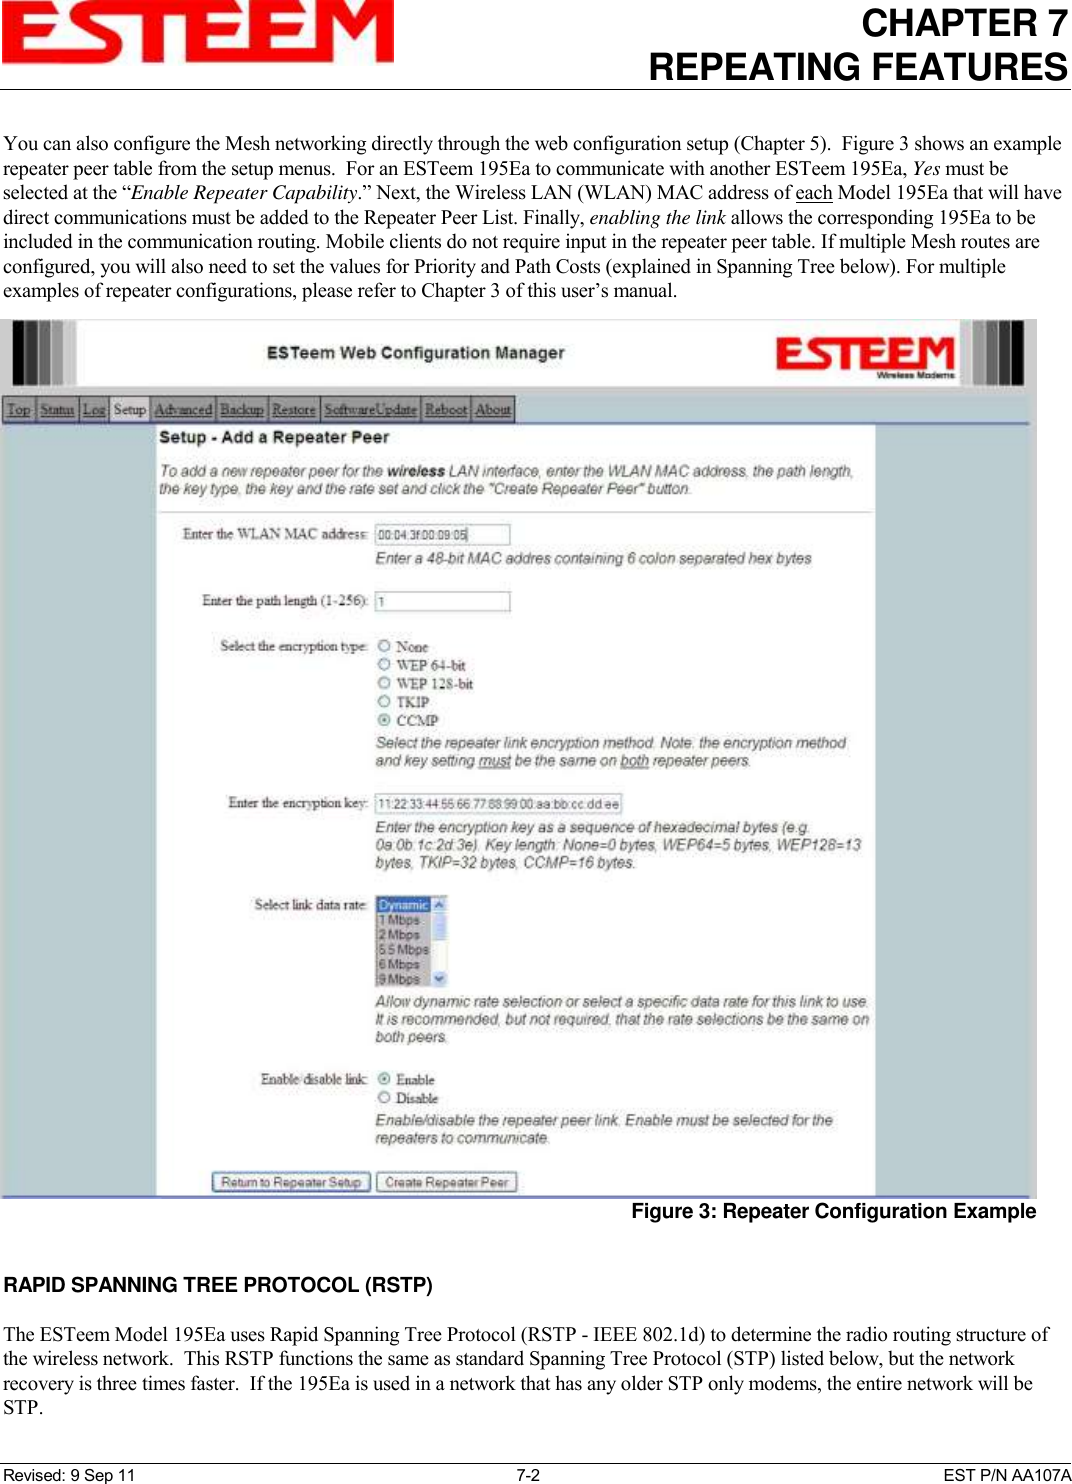 CHAPTER 7   REPEATING FEATURES   Revised: 9 Sep 11  7-2  EST P/N AA107A You can also configure the Mesh networking directly through the web configuration setup (Chapter 5).  Figure 3 shows an example repeater peer table from the setup menus.  For an ESTeem 195Ea to communicate with another ESTeem 195Ea, Yes must be selected at the “Enable Repeater Capability.” Next, the Wireless LAN (WLAN) MAC address of each Model 195Ea that will have direct communications must be added to the Repeater Peer List. Finally, enabling the link allows the corresponding 195Ea to be included in the communication routing. Mobile clients do not require input in the repeater peer table. If multiple Mesh routes are configured, you will also need to set the values for Priority and Path Costs (explained in Spanning Tree below). For multiple examples of repeater configurations, please refer to Chapter 3 of this user’s manual.   RAPID SPANNING TREE PROTOCOL (RSTP)  The ESTeem Model 195Ea uses Rapid Spanning Tree Protocol (RSTP - IEEE 802.1d) to determine the radio routing structure of the wireless network.  This RSTP functions the same as standard Spanning Tree Protocol (STP) listed below, but the network recovery is three times faster.  If the 195Ea is used in a network that has any older STP only modems, the entire network will be STP.  Figure 3: Repeater Configuration Example 